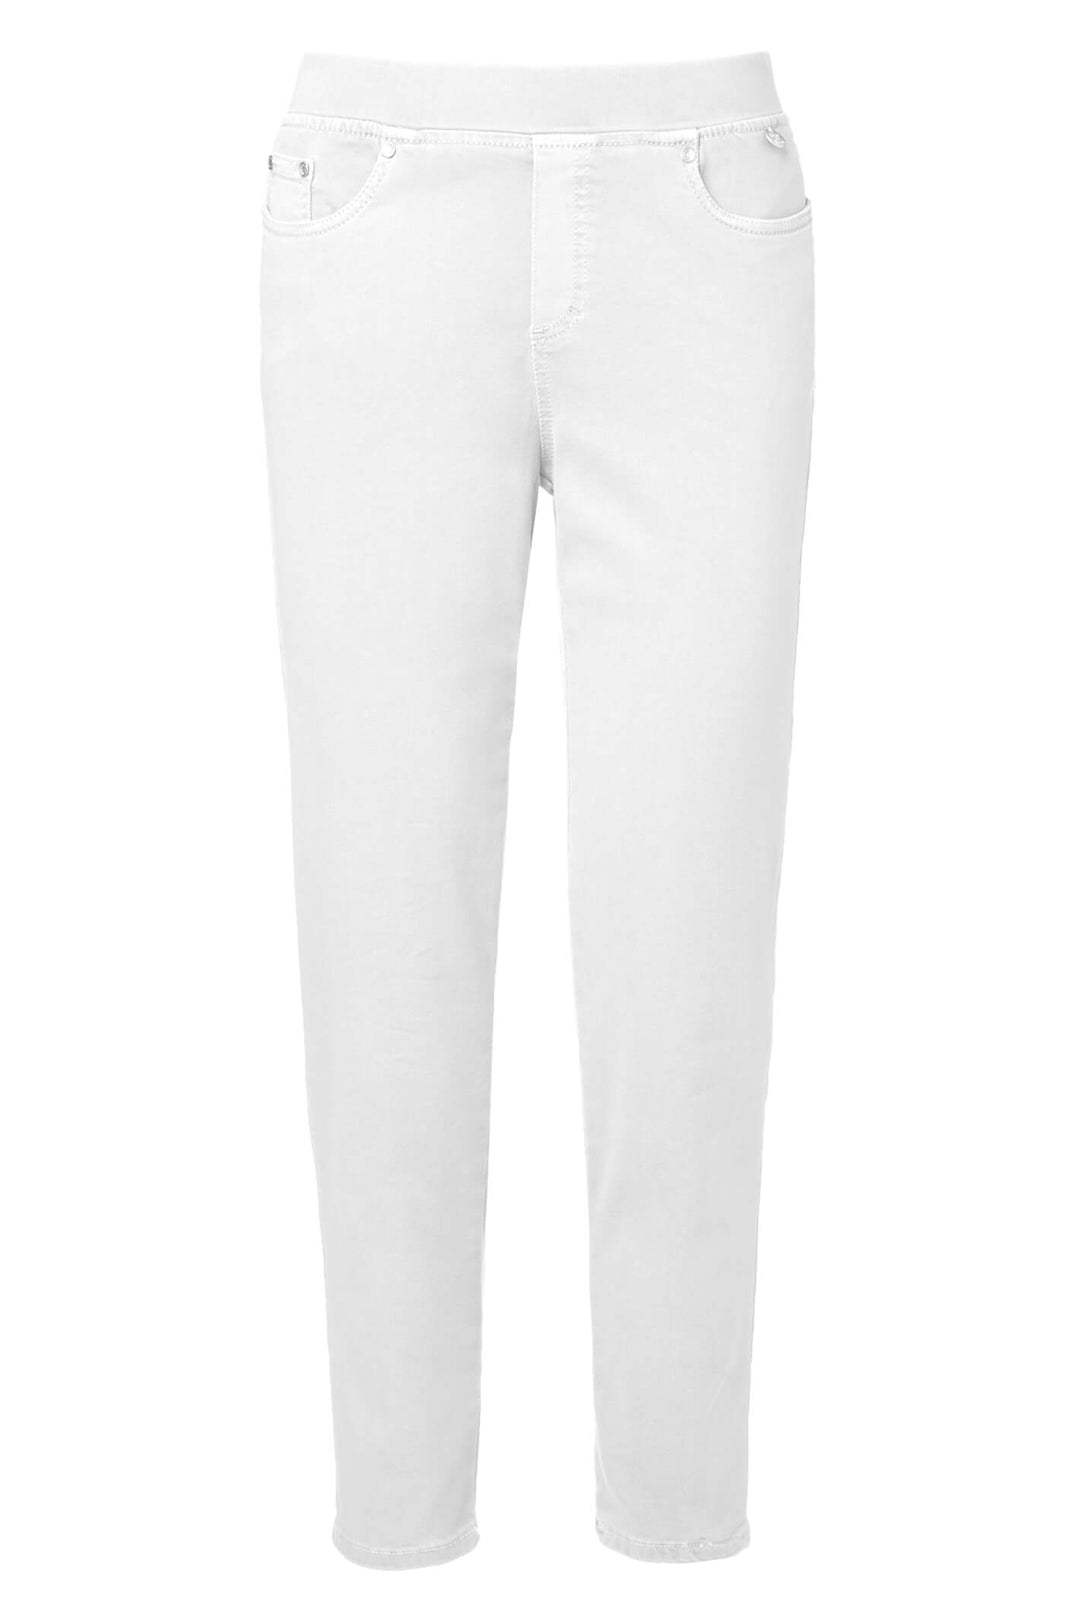 Anna Montana Angelika Rom 1106 White 3 Jump In Pull On Jeans - Shirley Allum Boutique